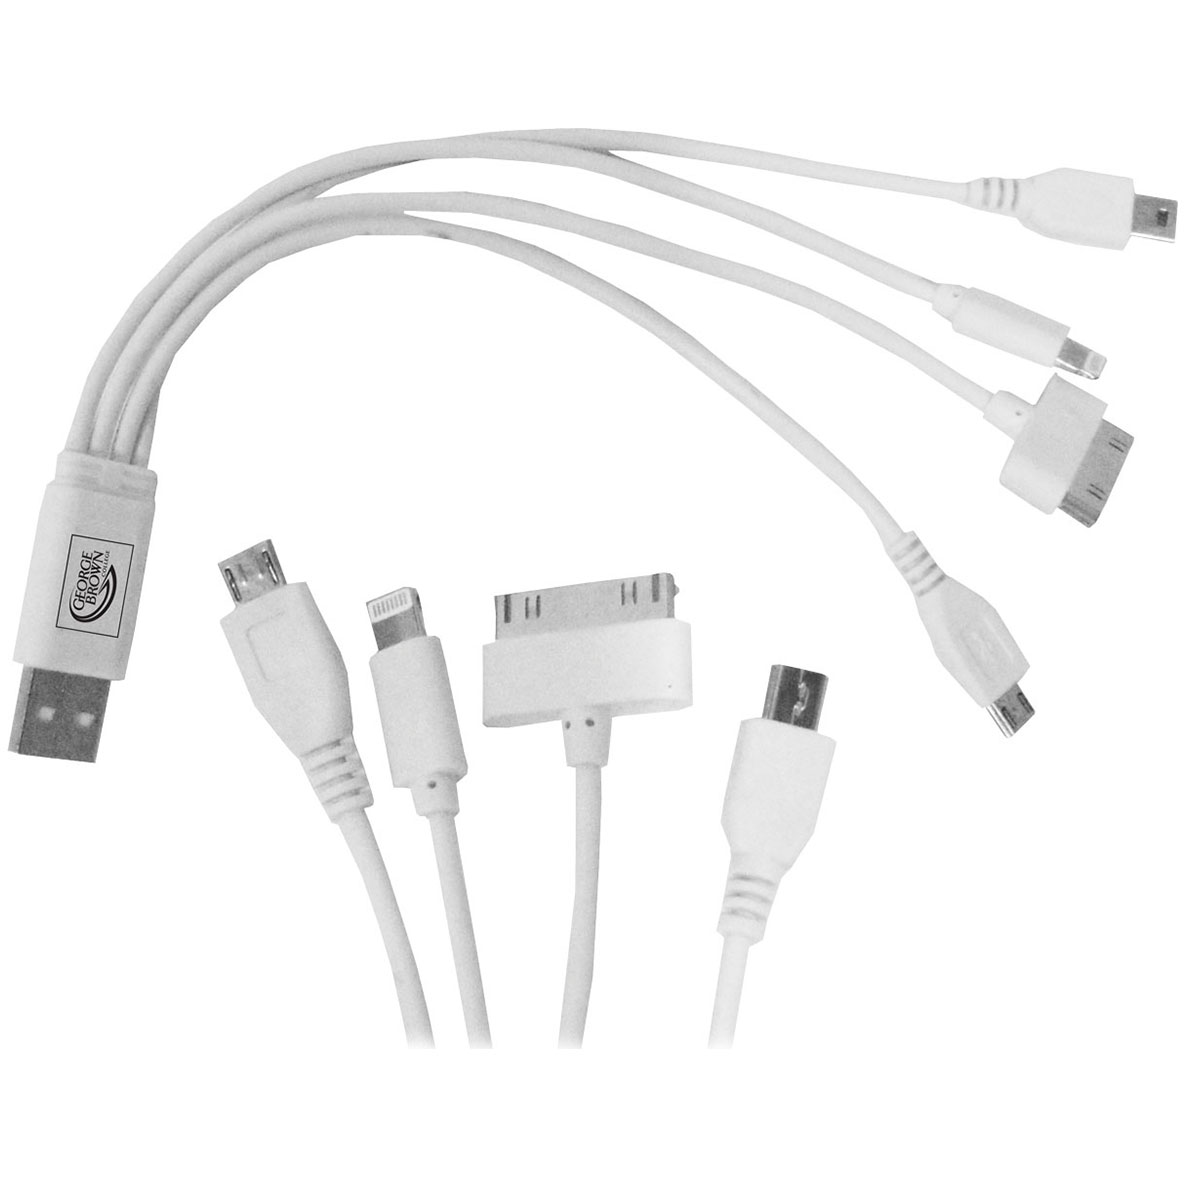 4 in 1 USB Charging Cables